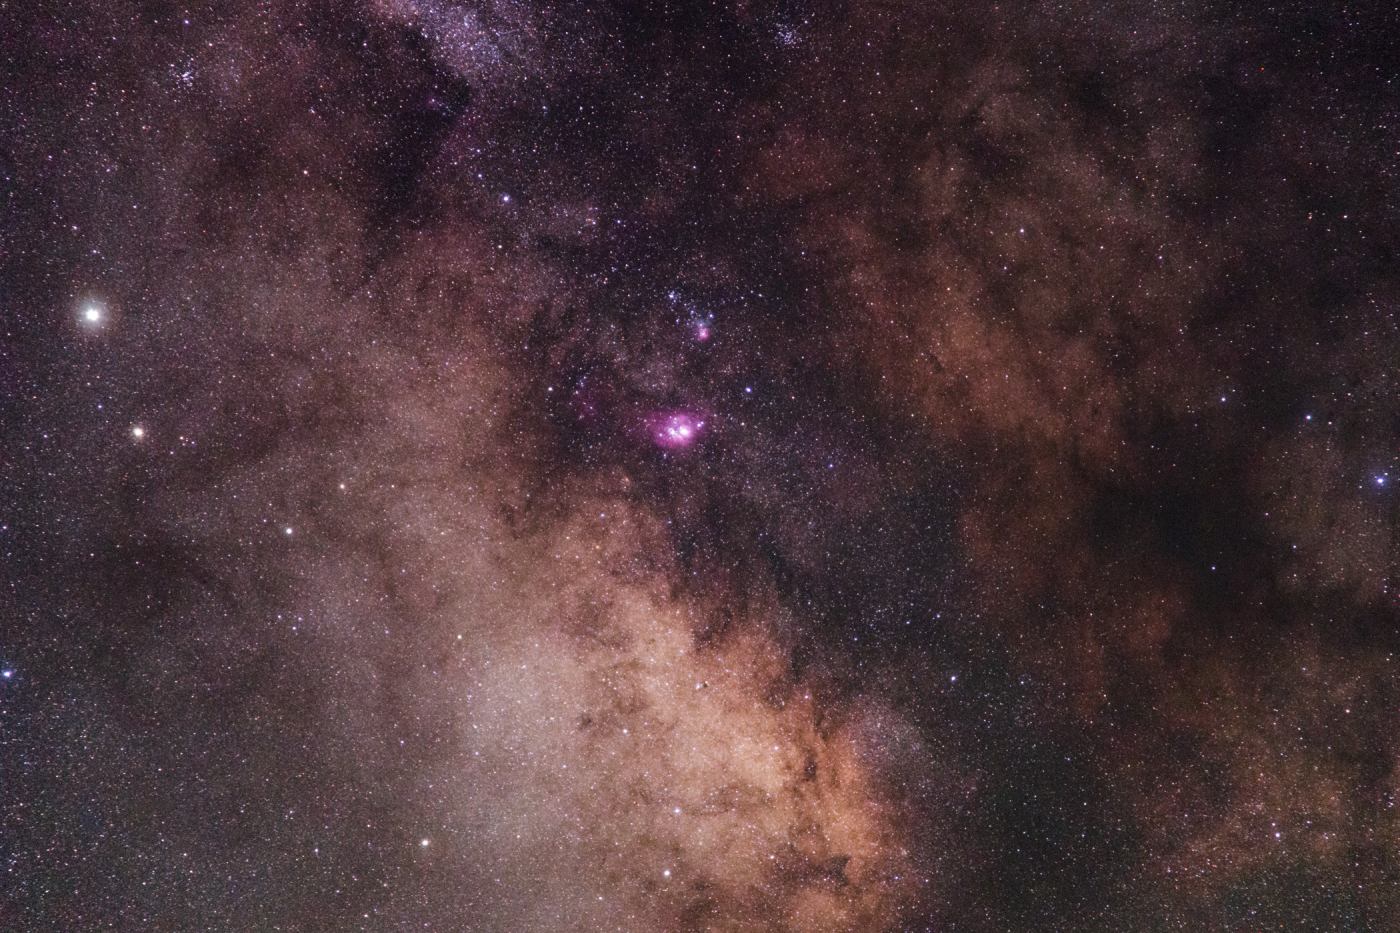 Milky Way Lagoon Nebula and Galactic Center, Pentax K-1 Mark II, Astrotracer, 40s, f/5.6, ISO 12800, Stack of 9